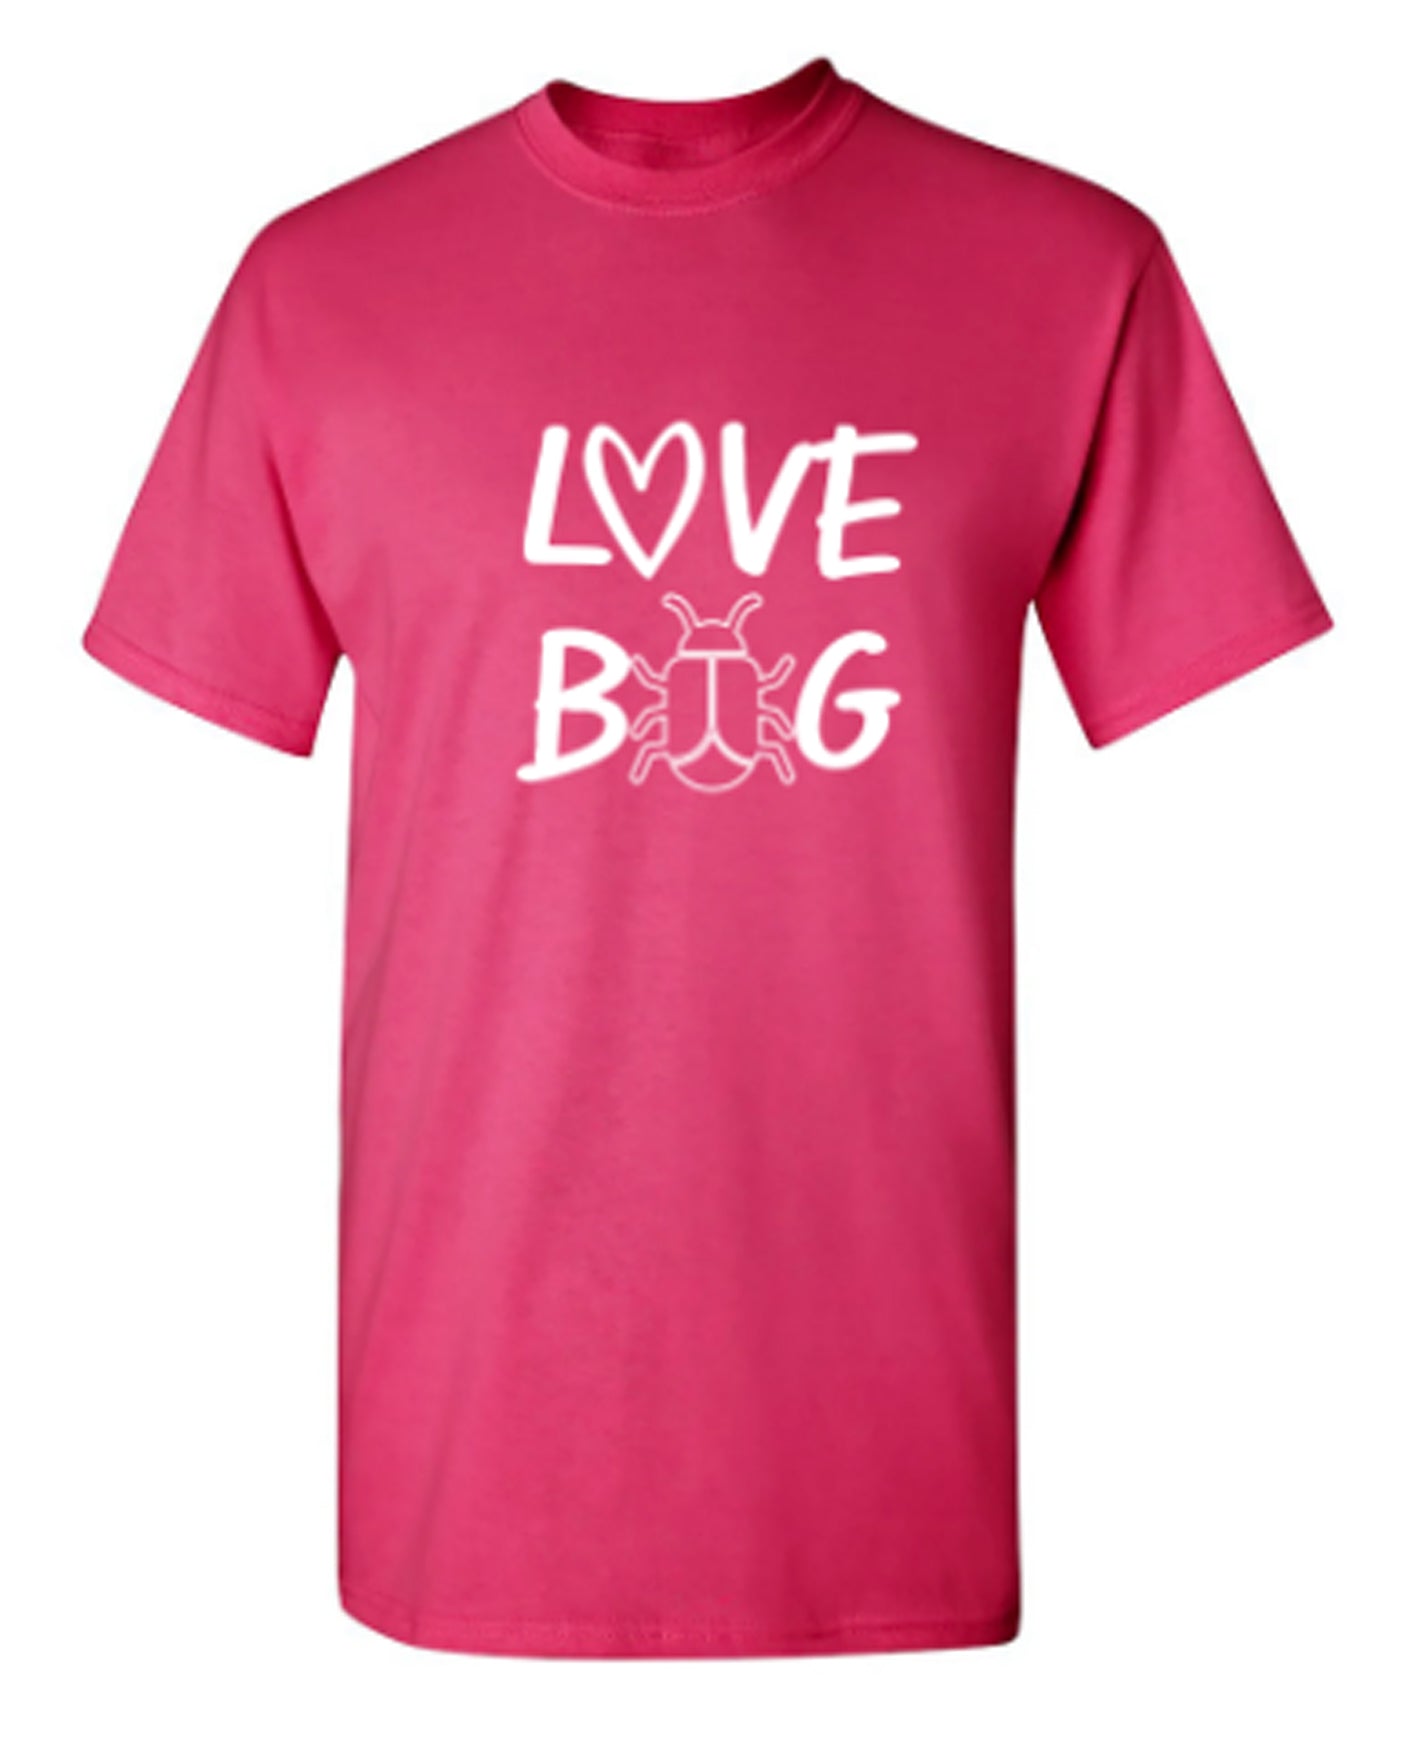 LOVE BUG - Funny T Shirts & Graphic Tees